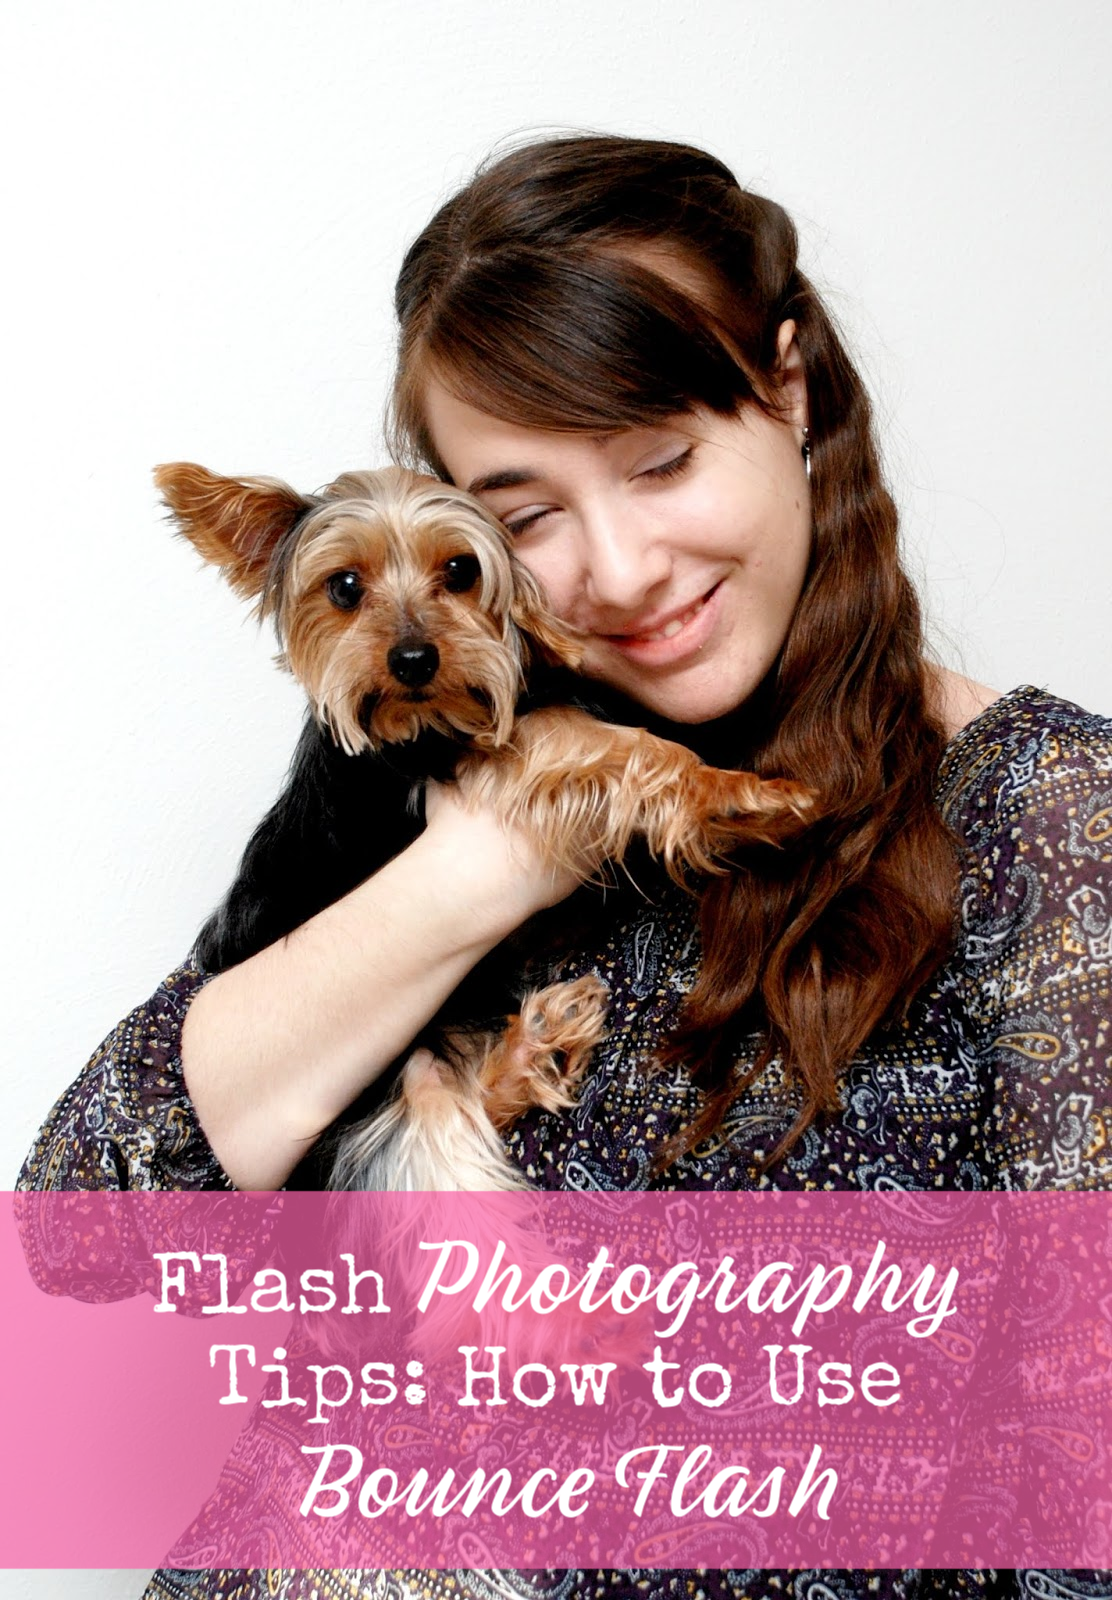 How to use bounce flash with an external flash